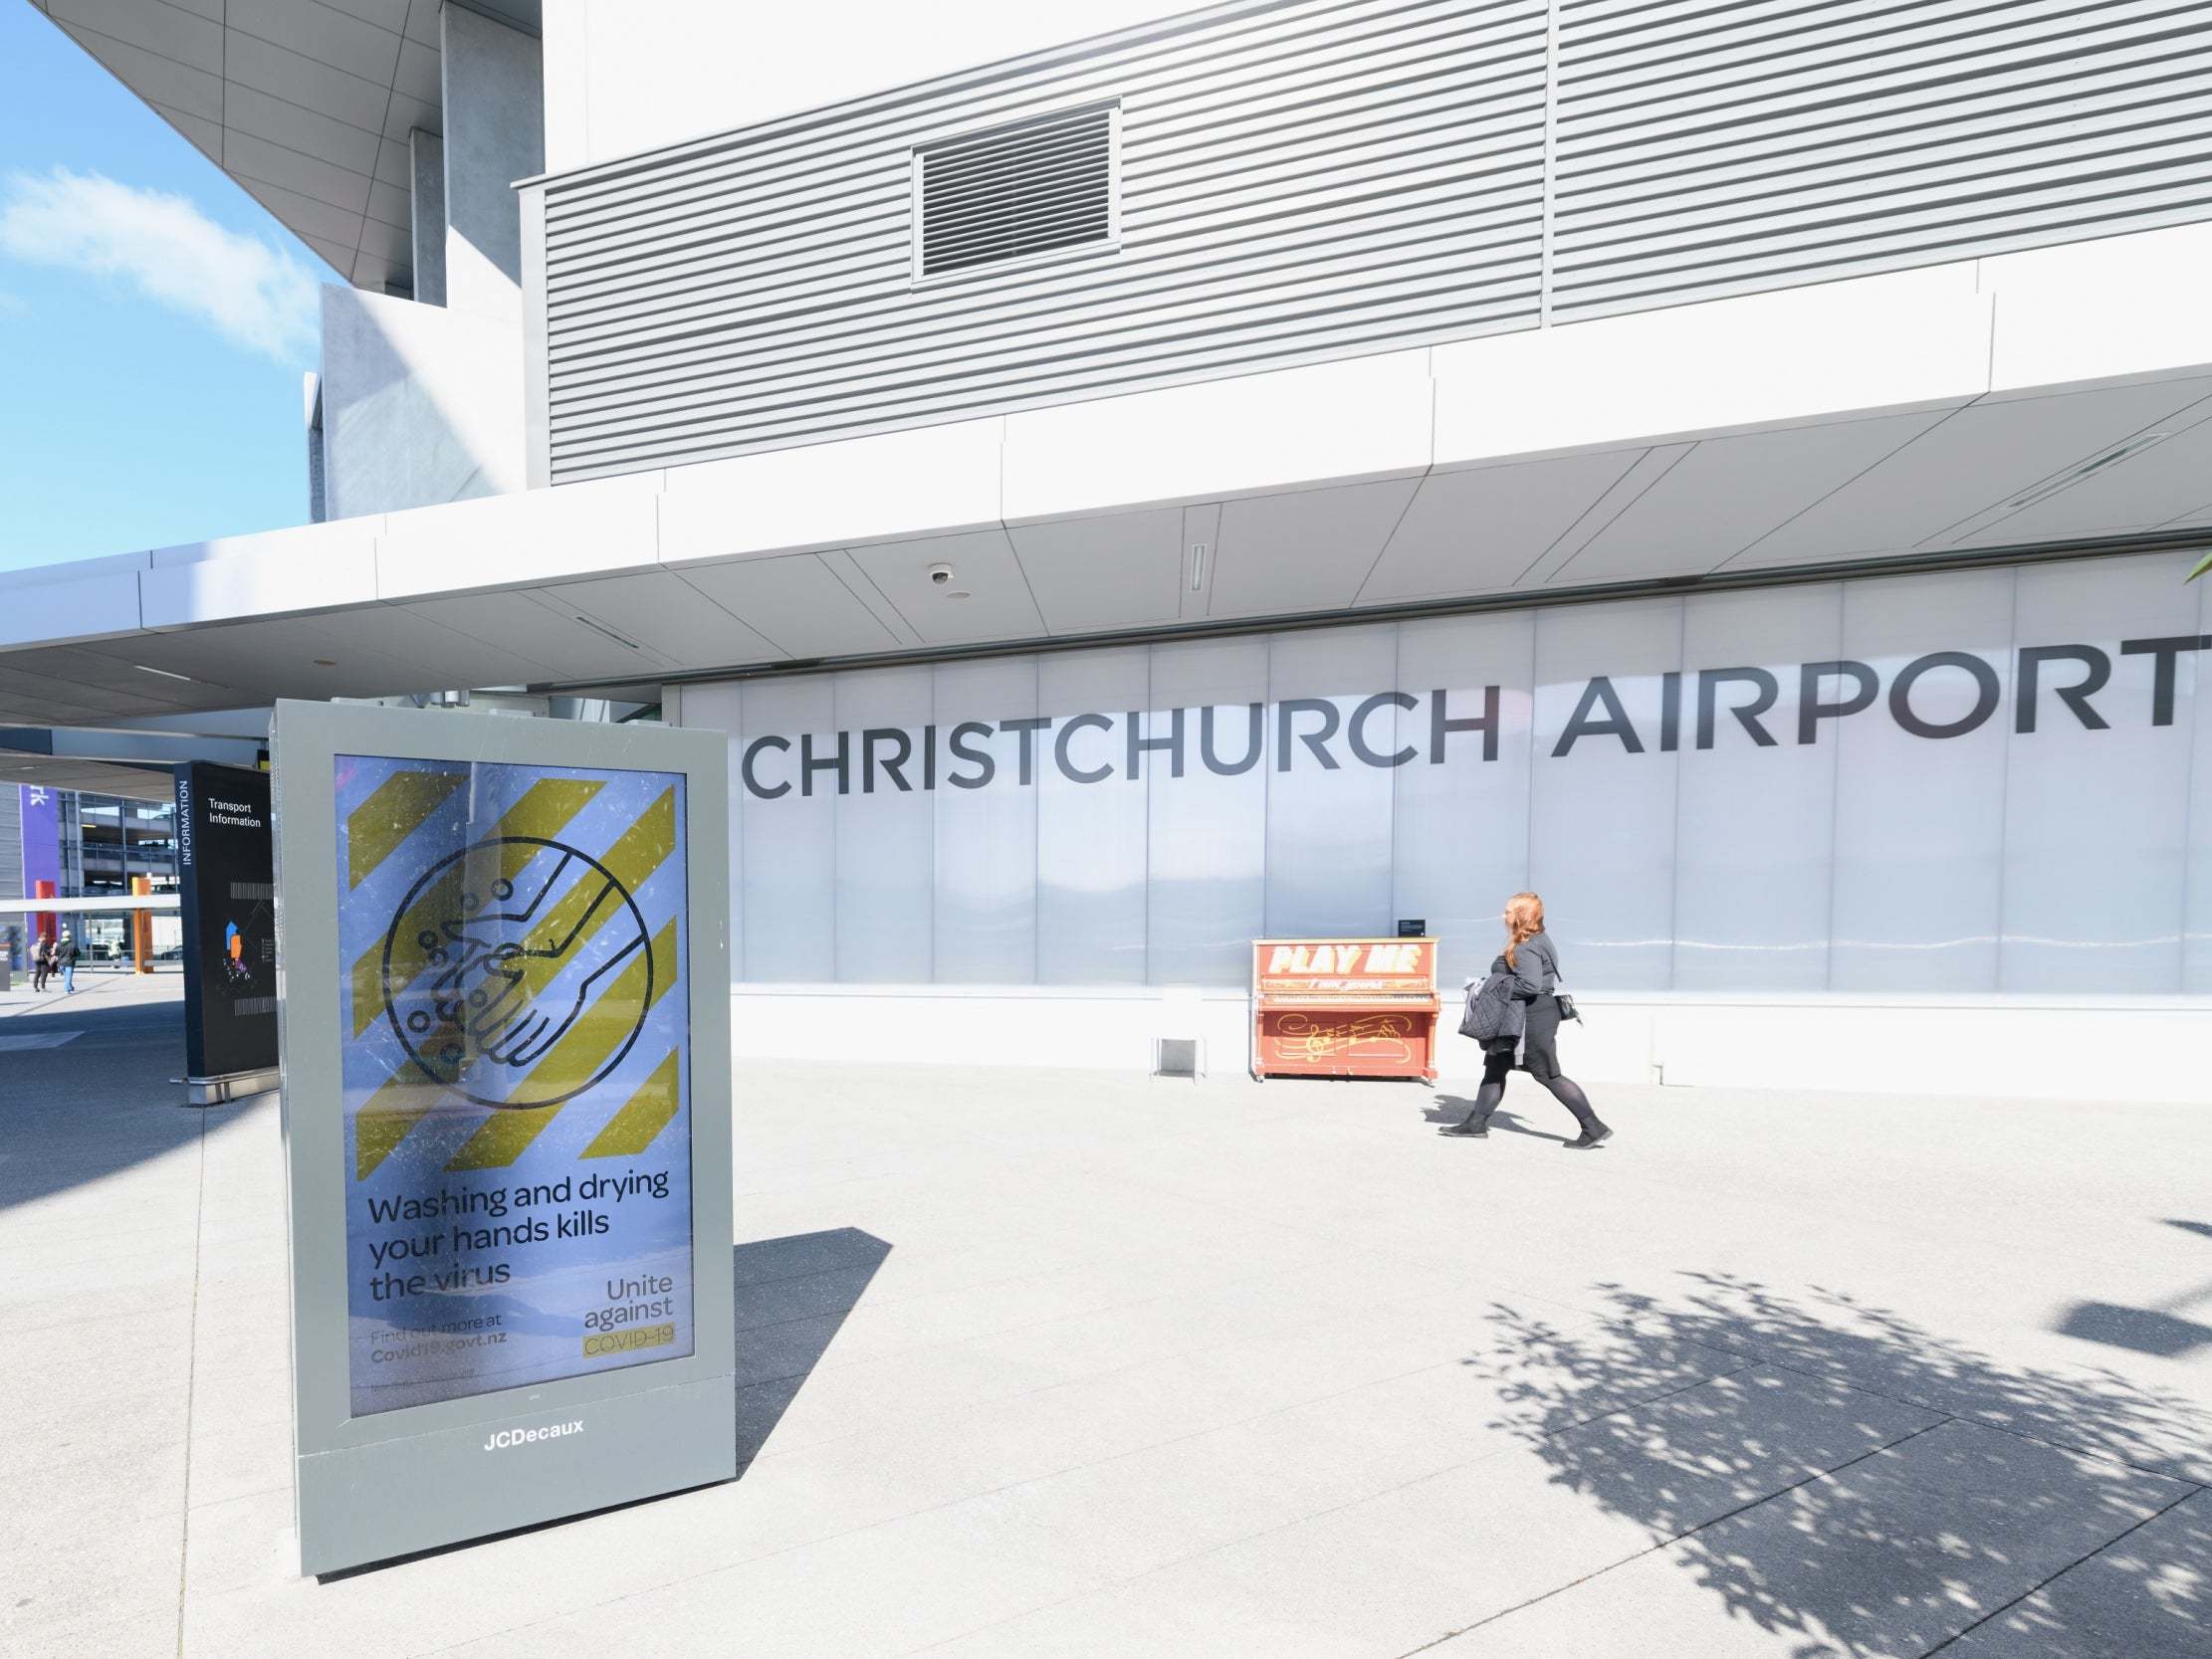 A sign saying washing and drying your hands kills the virus is seen at Christchurch International Airport in Christchurch, New Zealand